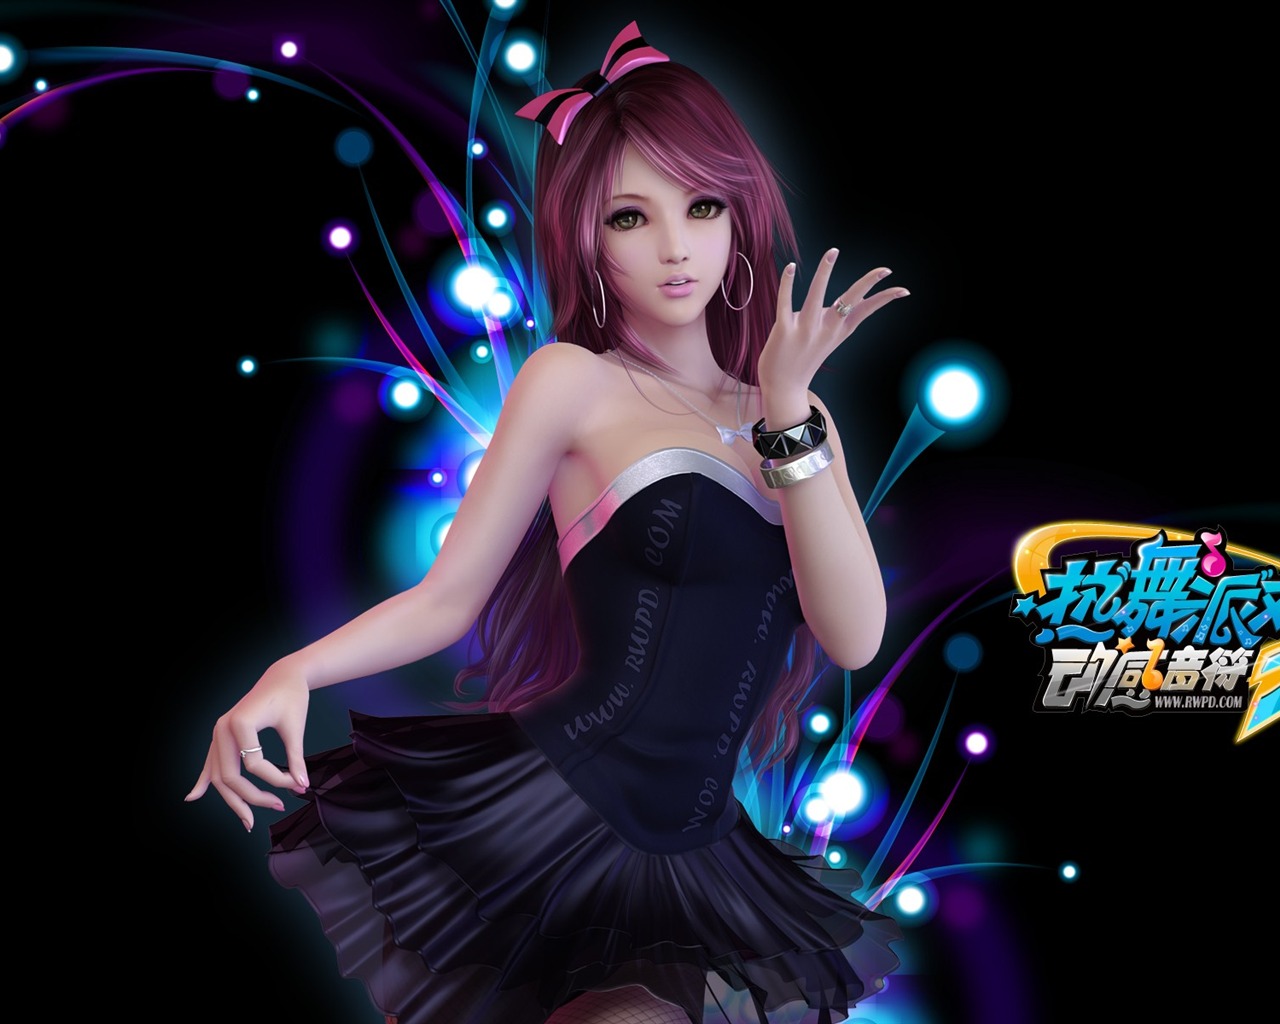 Online game Hot Dance Party II official wallpapers #31 - 1280x1024